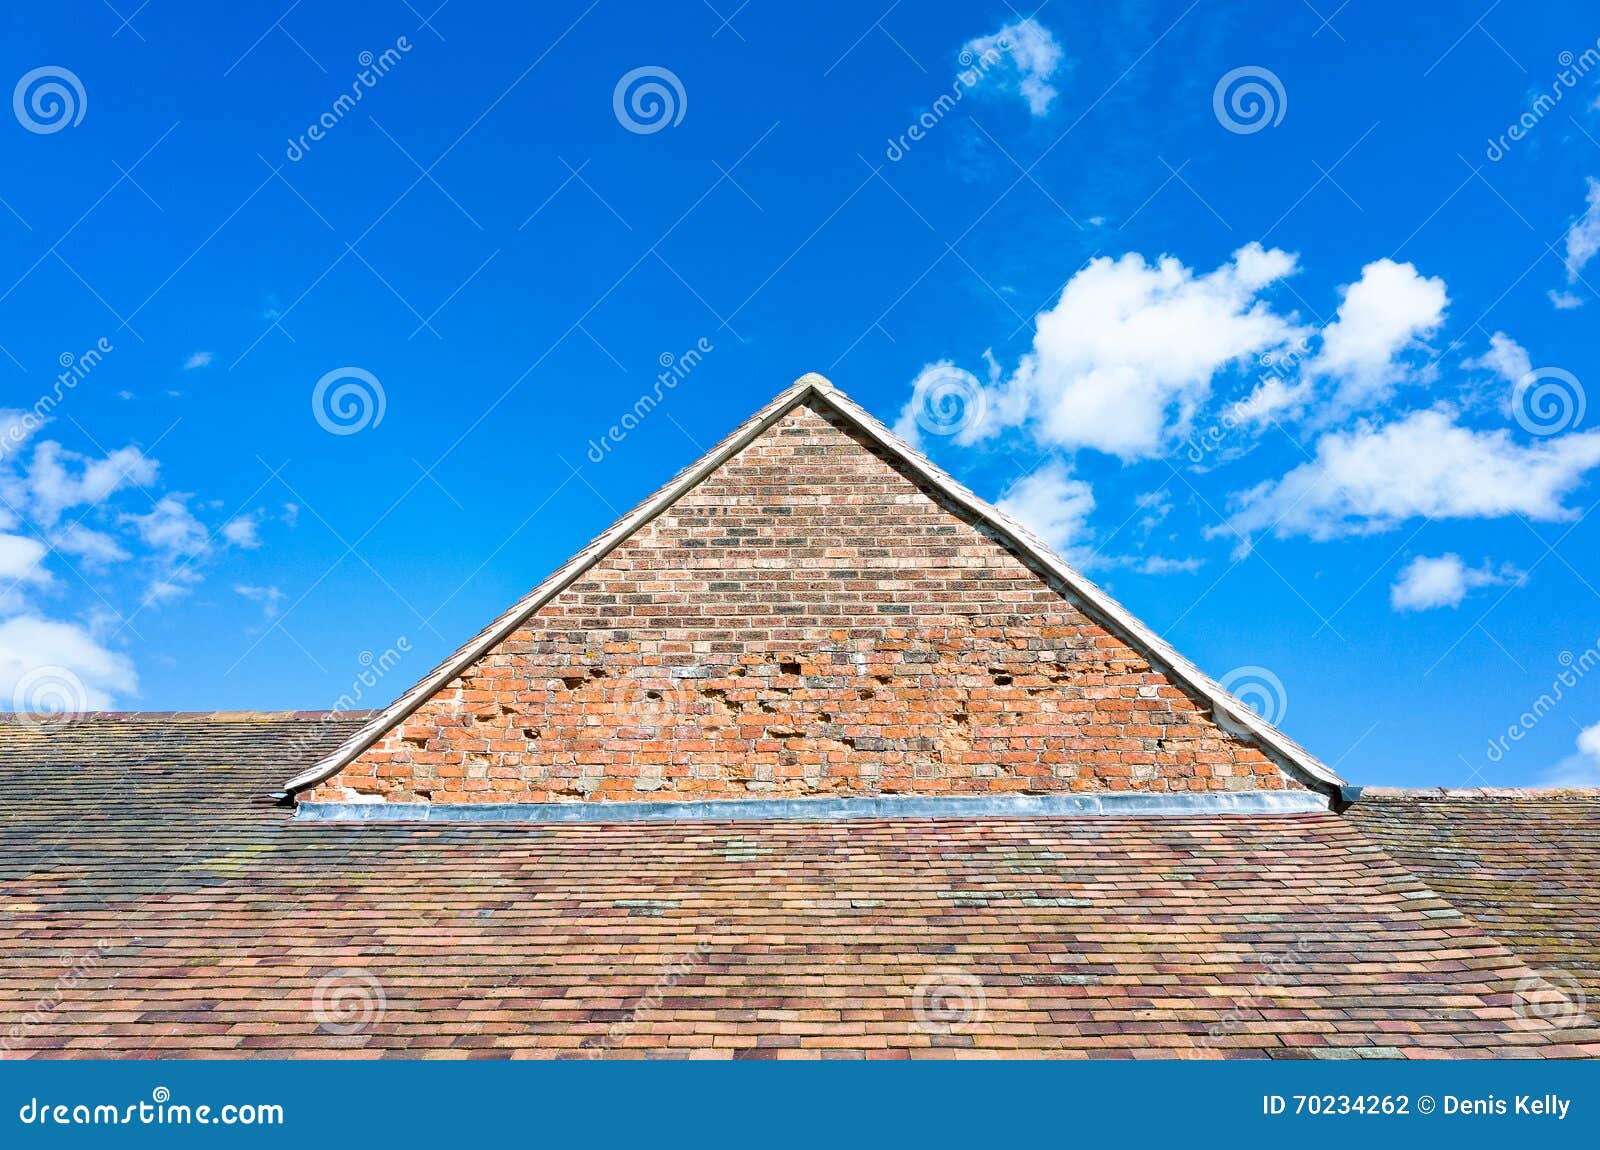 house roof and gable